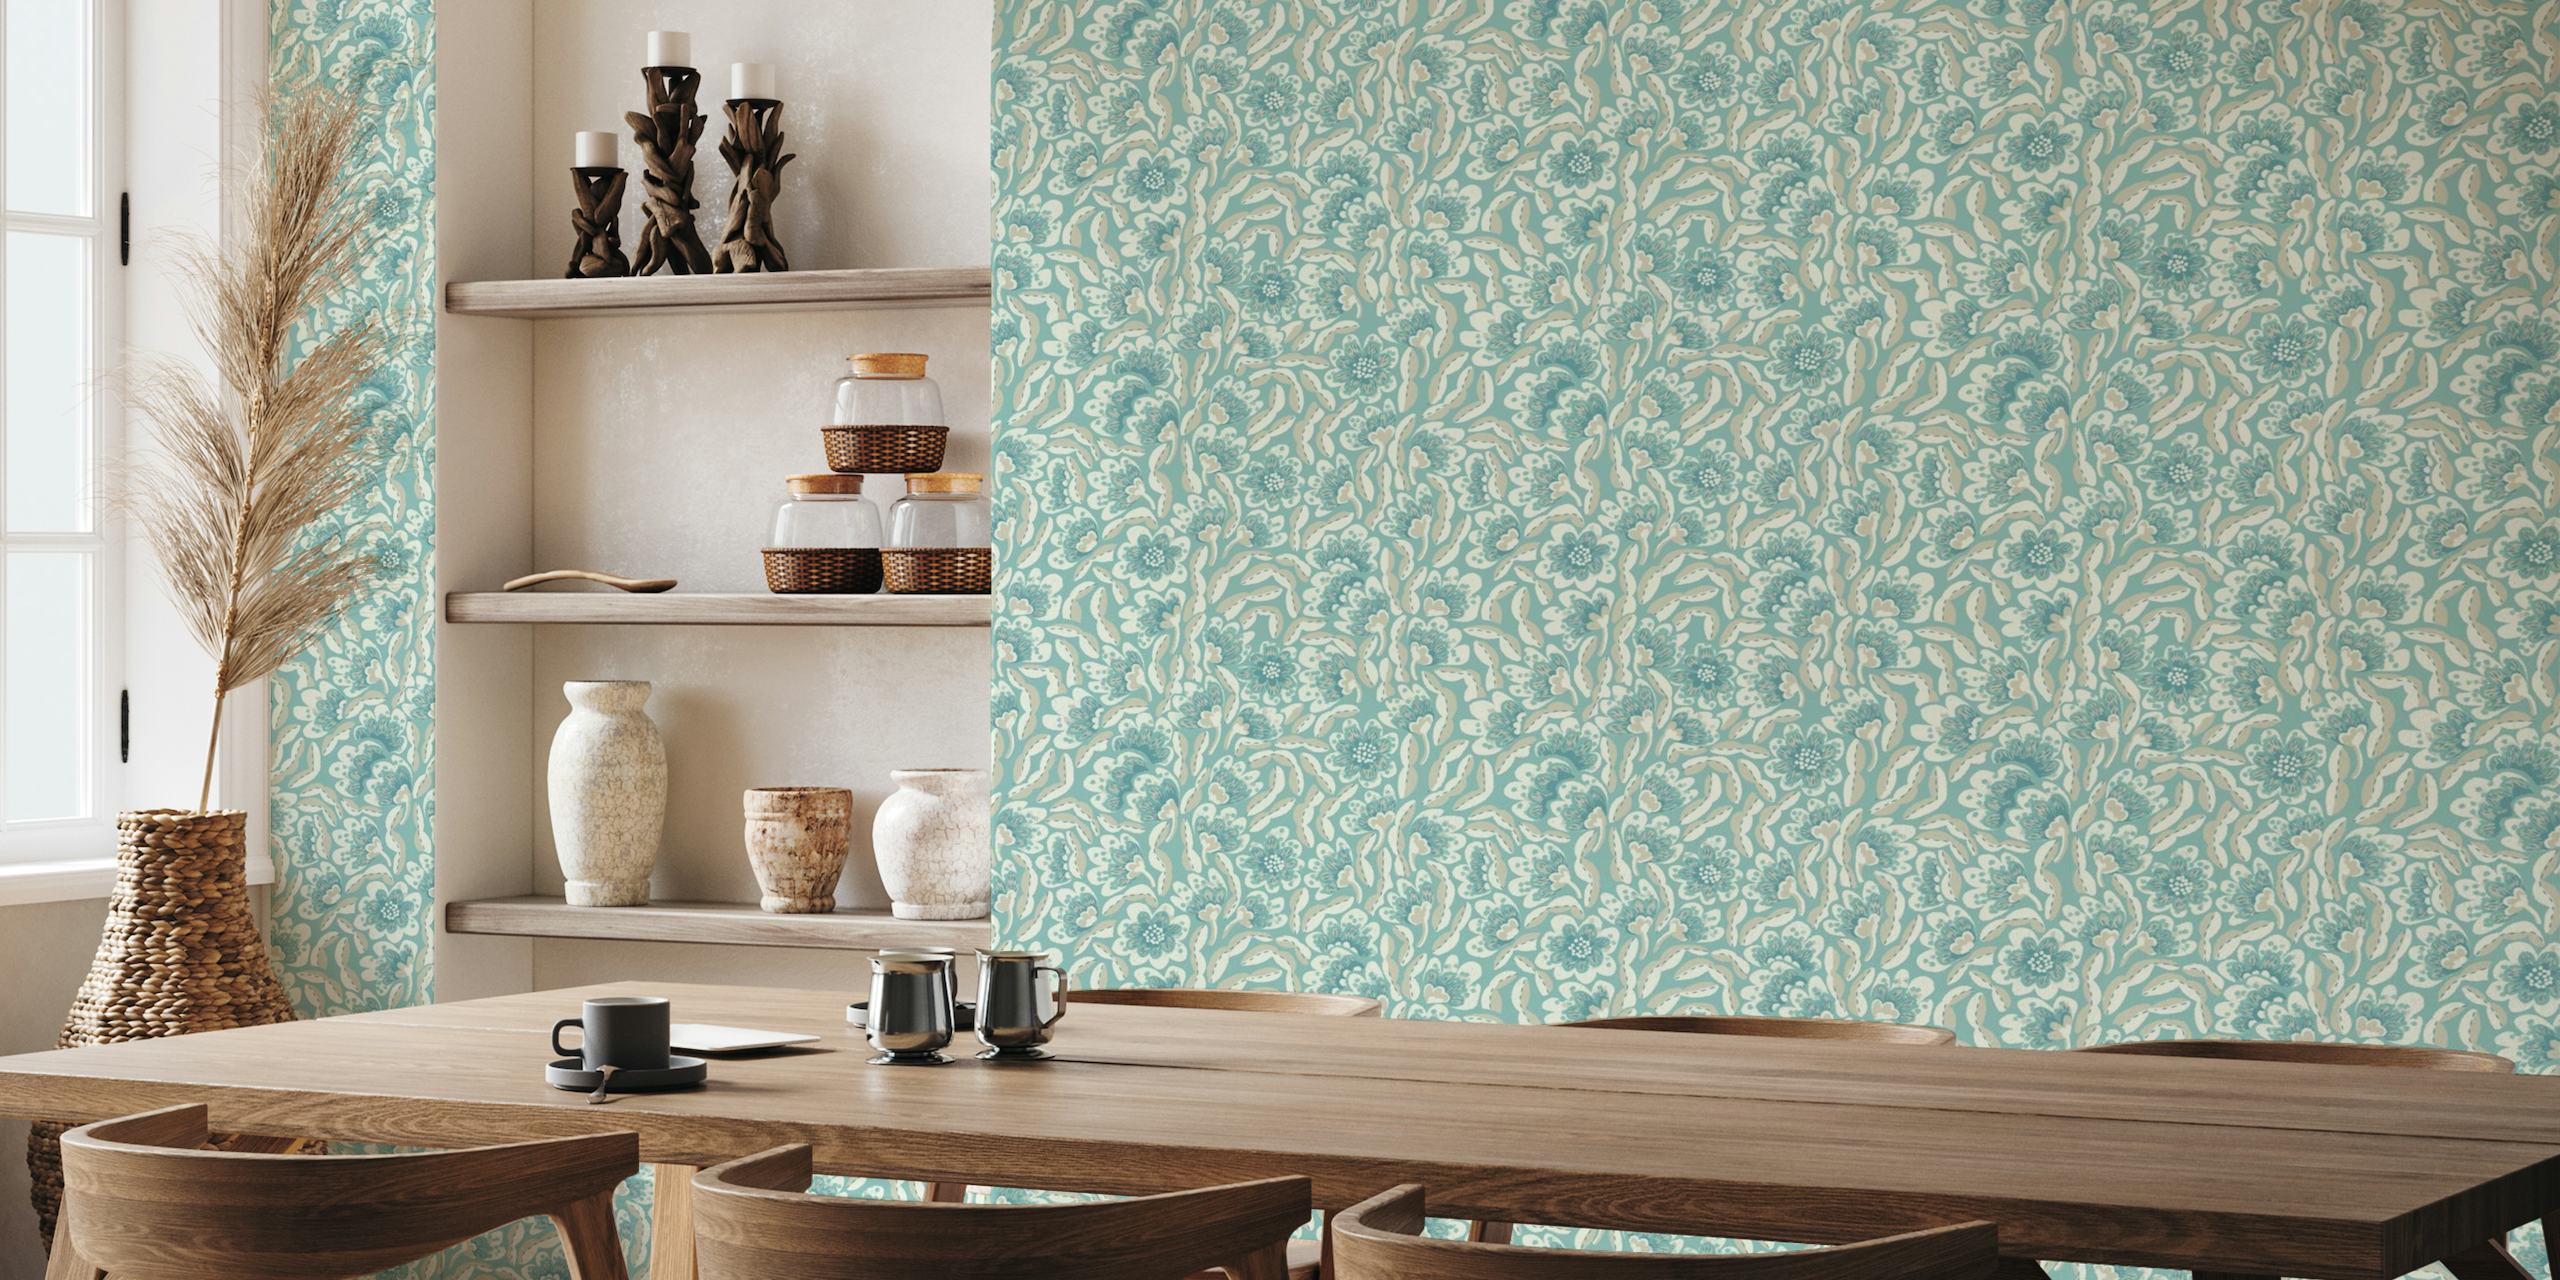 Neutral, abstract floral design wall mural in subdued colors